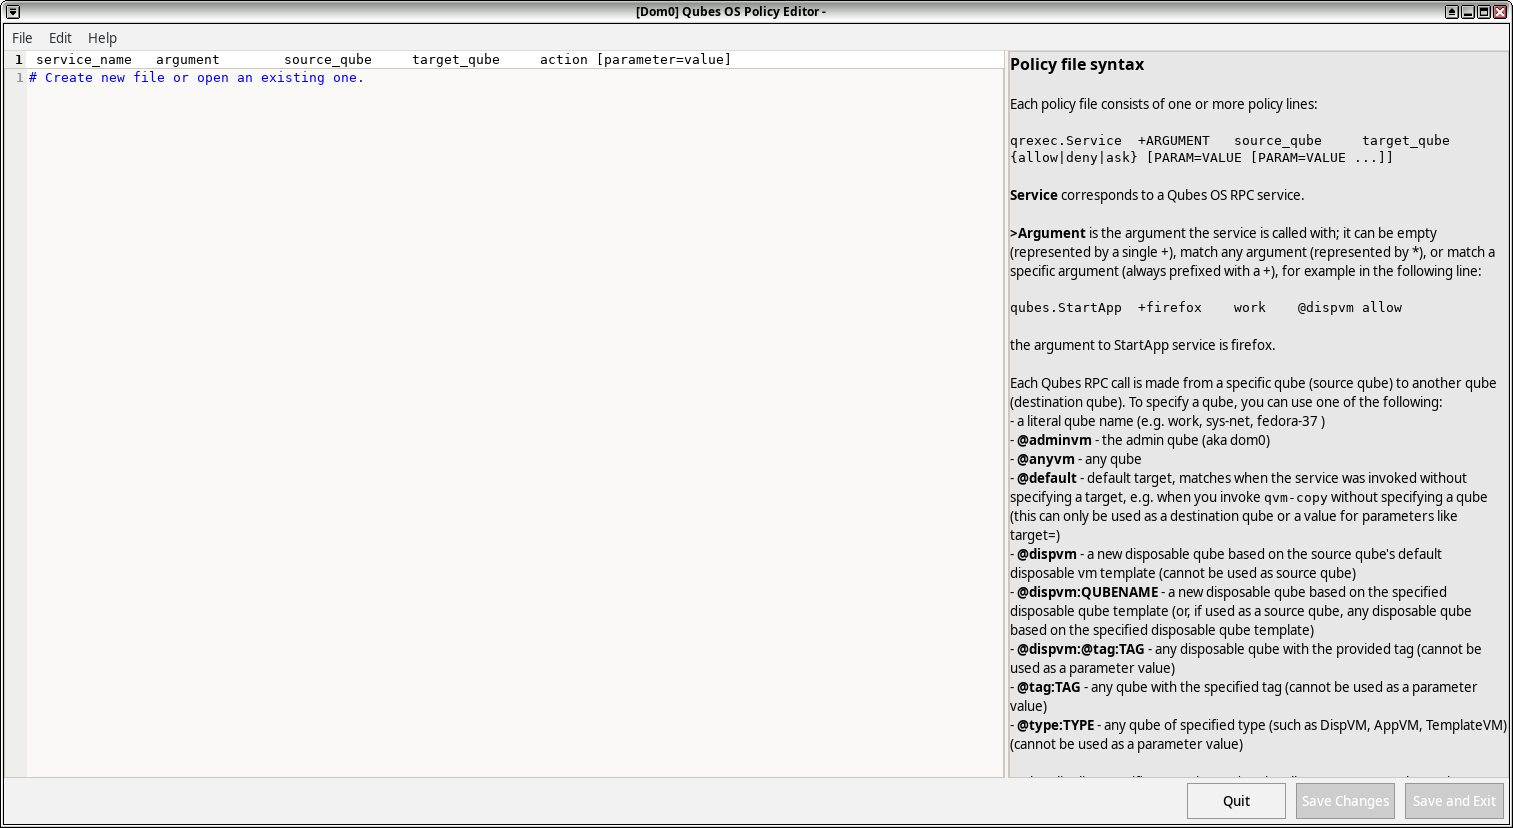 Screenshot of the Qubes OS Policy Editor tool